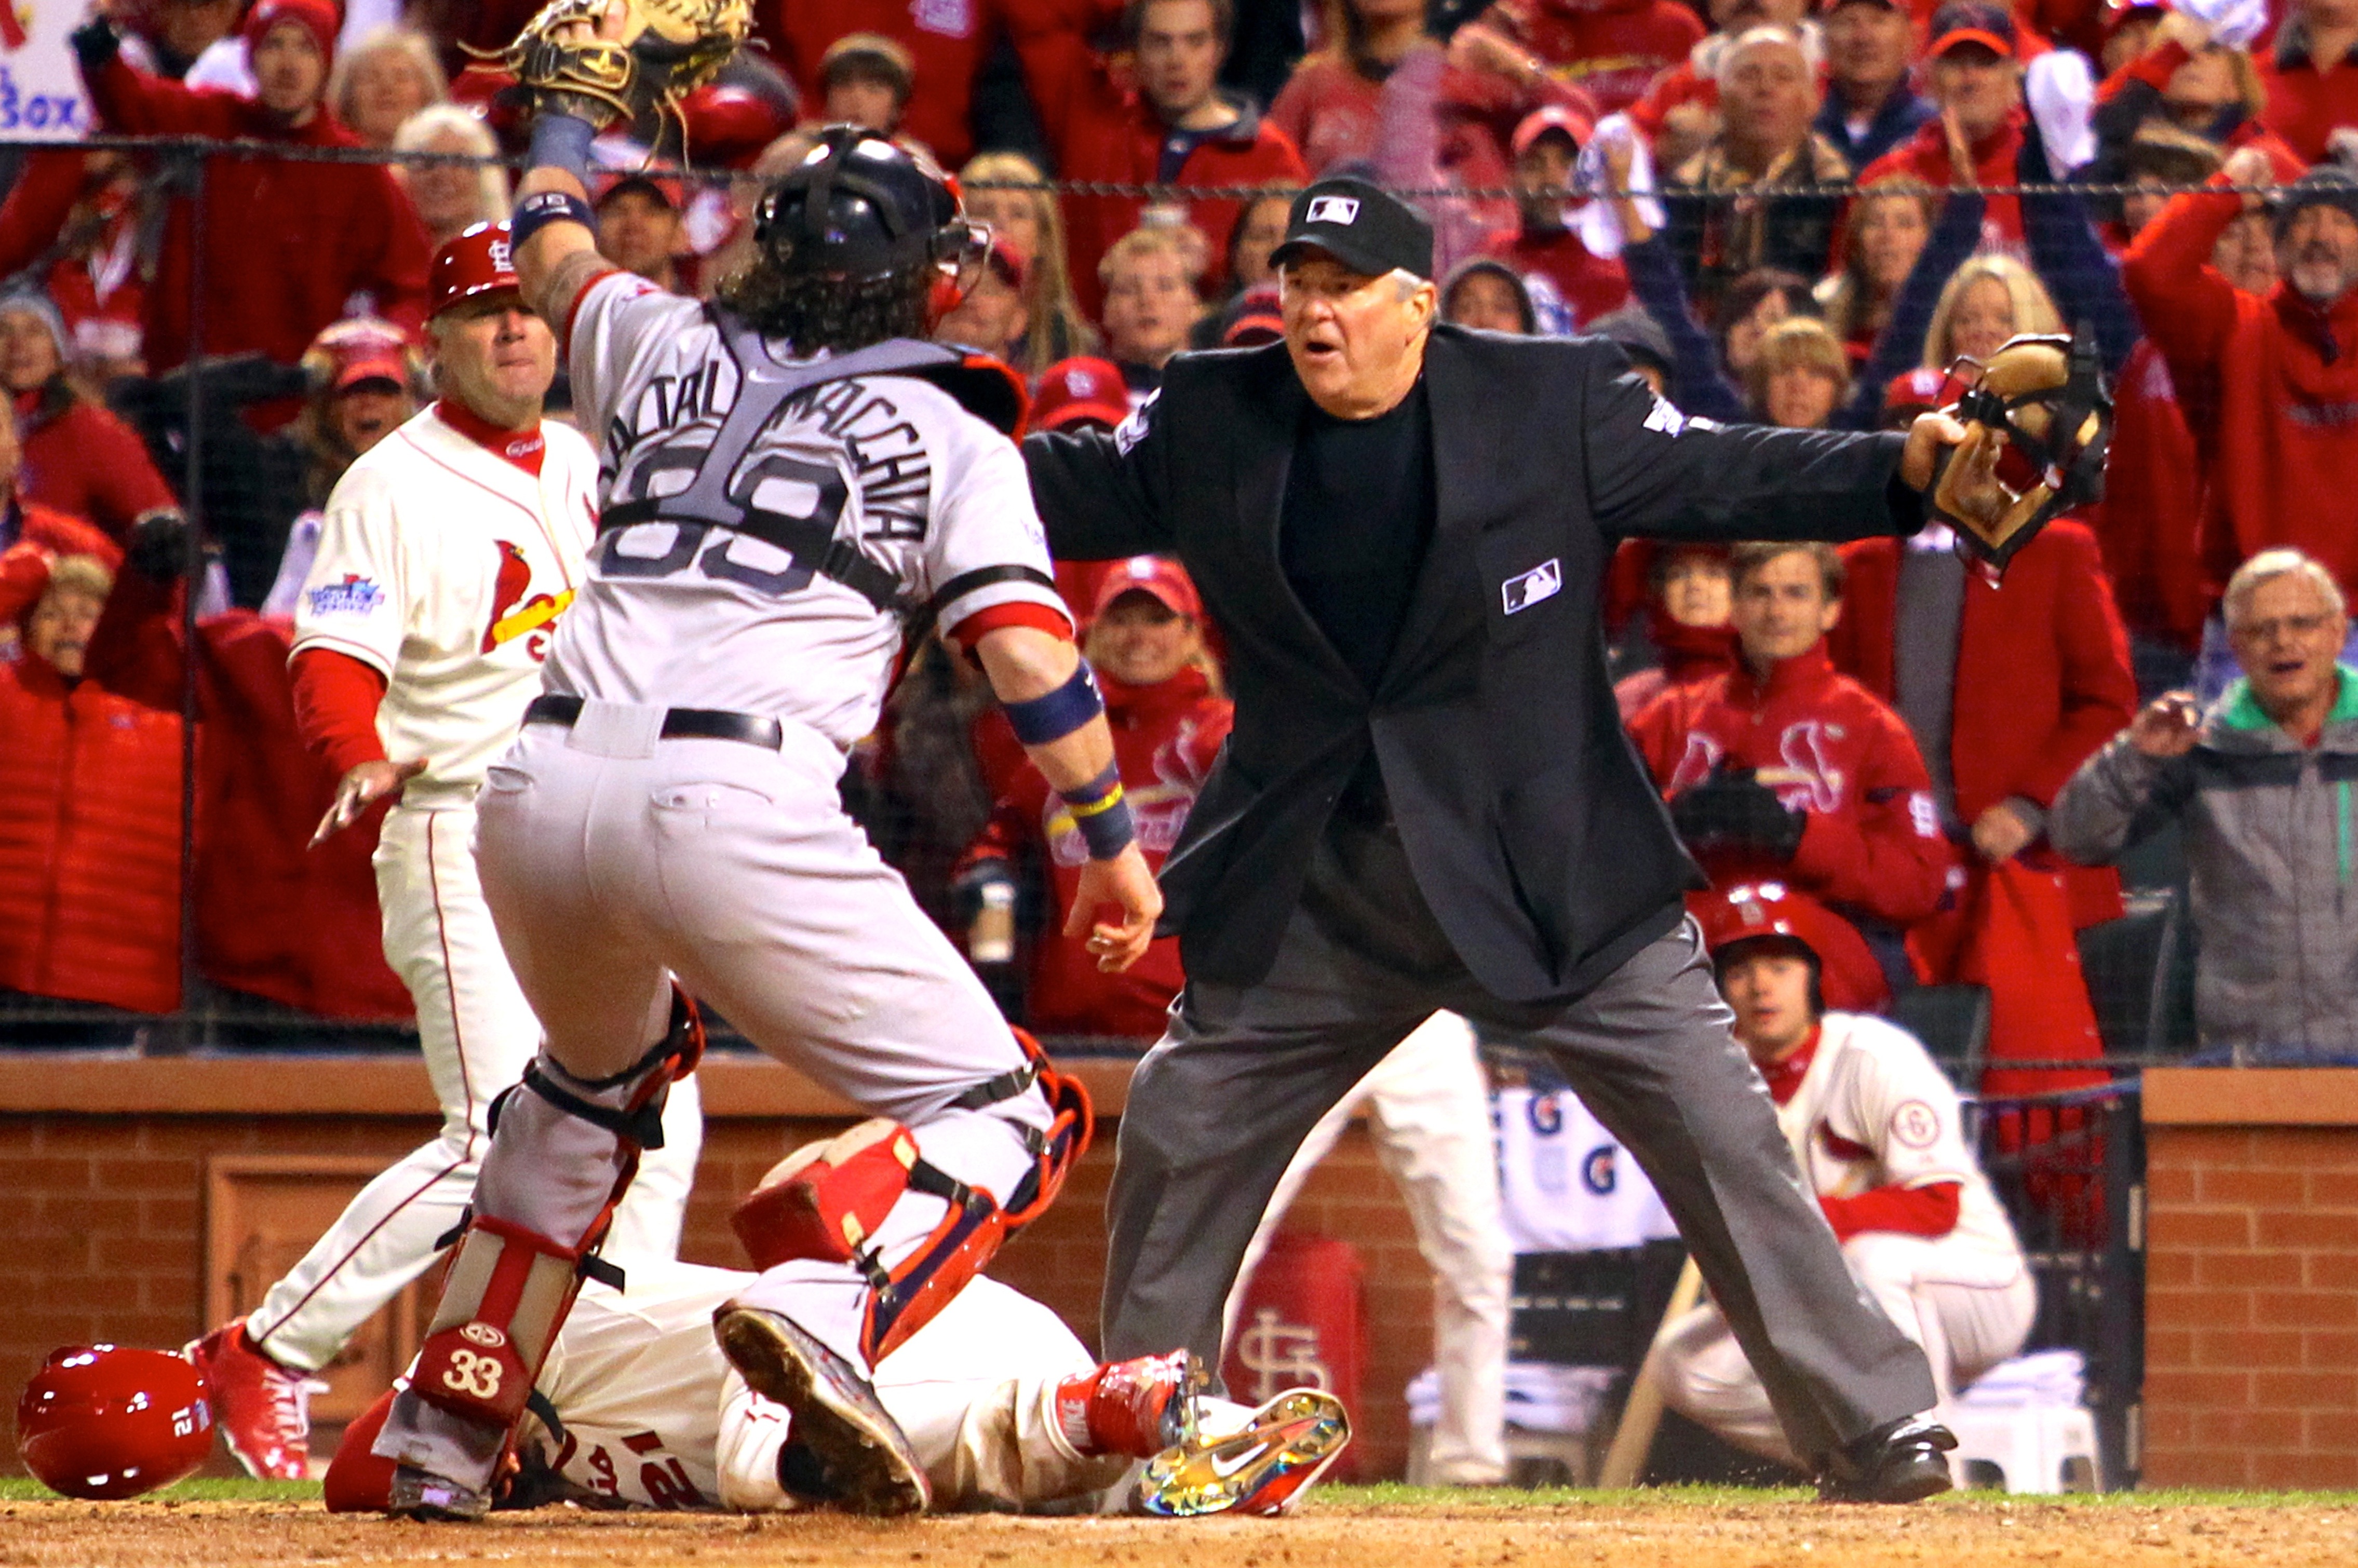 Red Sox vs. Cardinals Score, Grades and Analysis for 2013 World Series